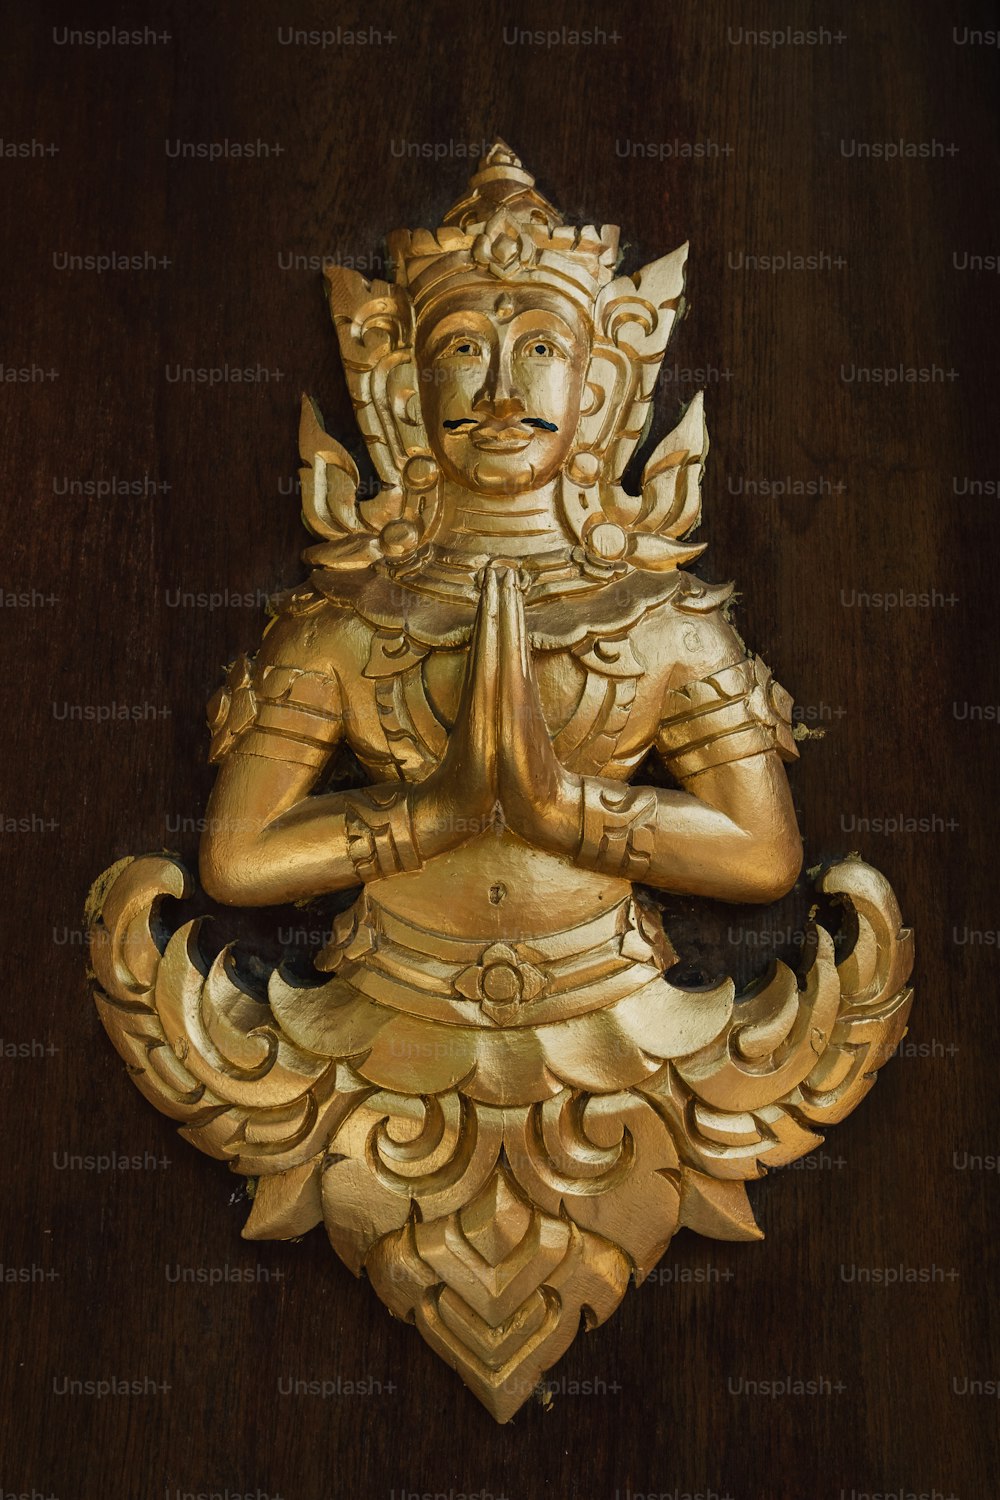 a golden statue of a person sitting in a lotus position